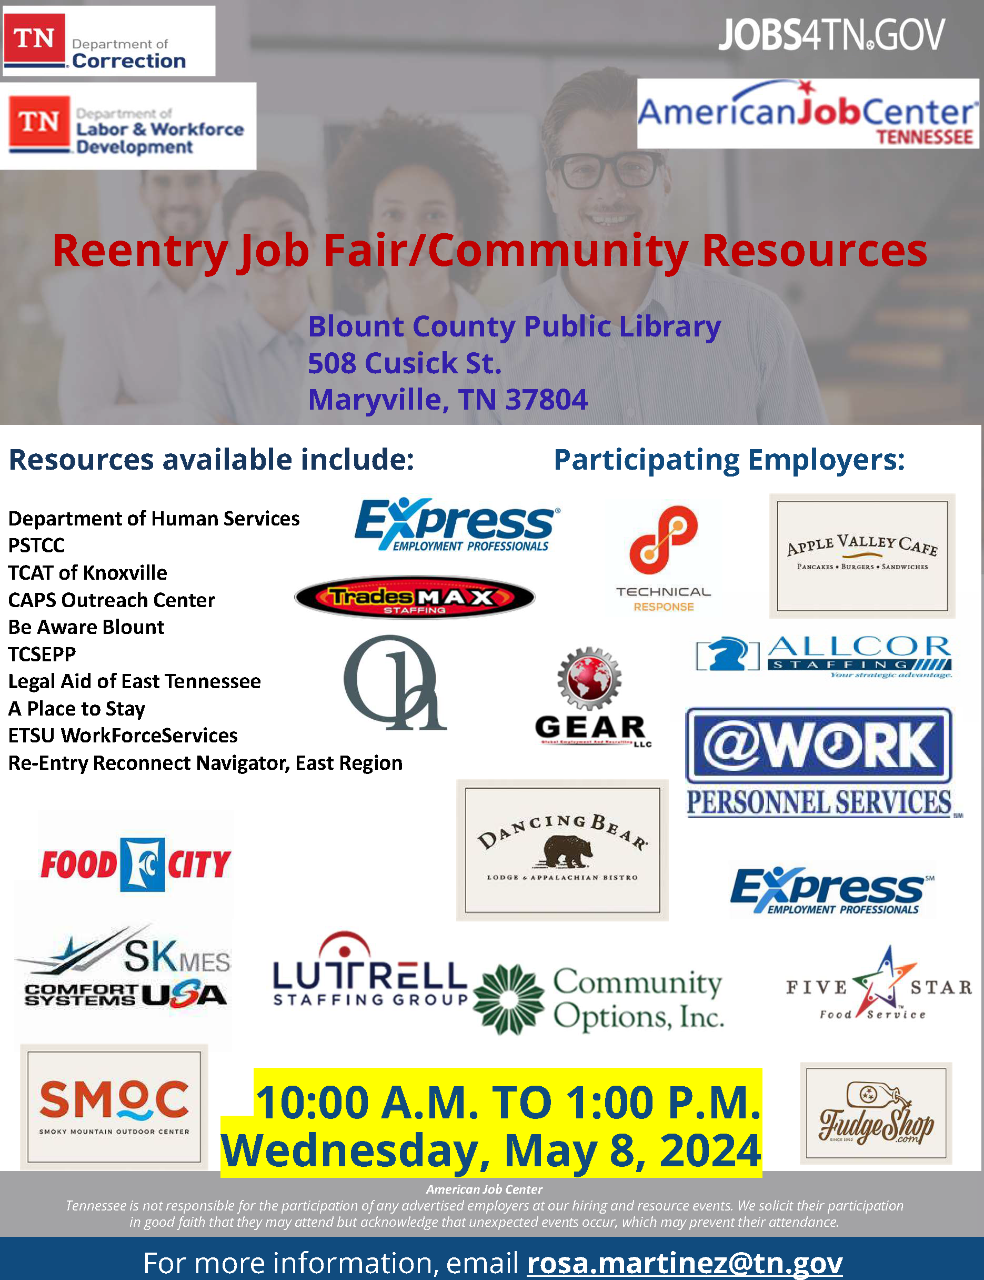 The Reentry Job Fair in Blount County is May 8, 2024